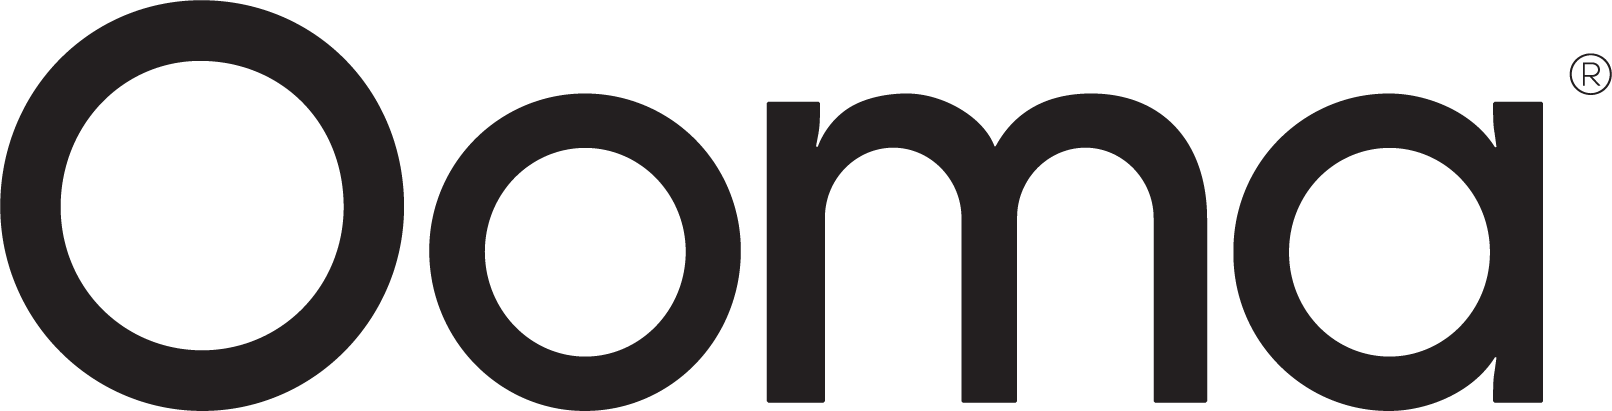 Ooma Logo - Ooma Agrees to Acquire Voxter, Provider of Advanced UCaaS Solutions ...